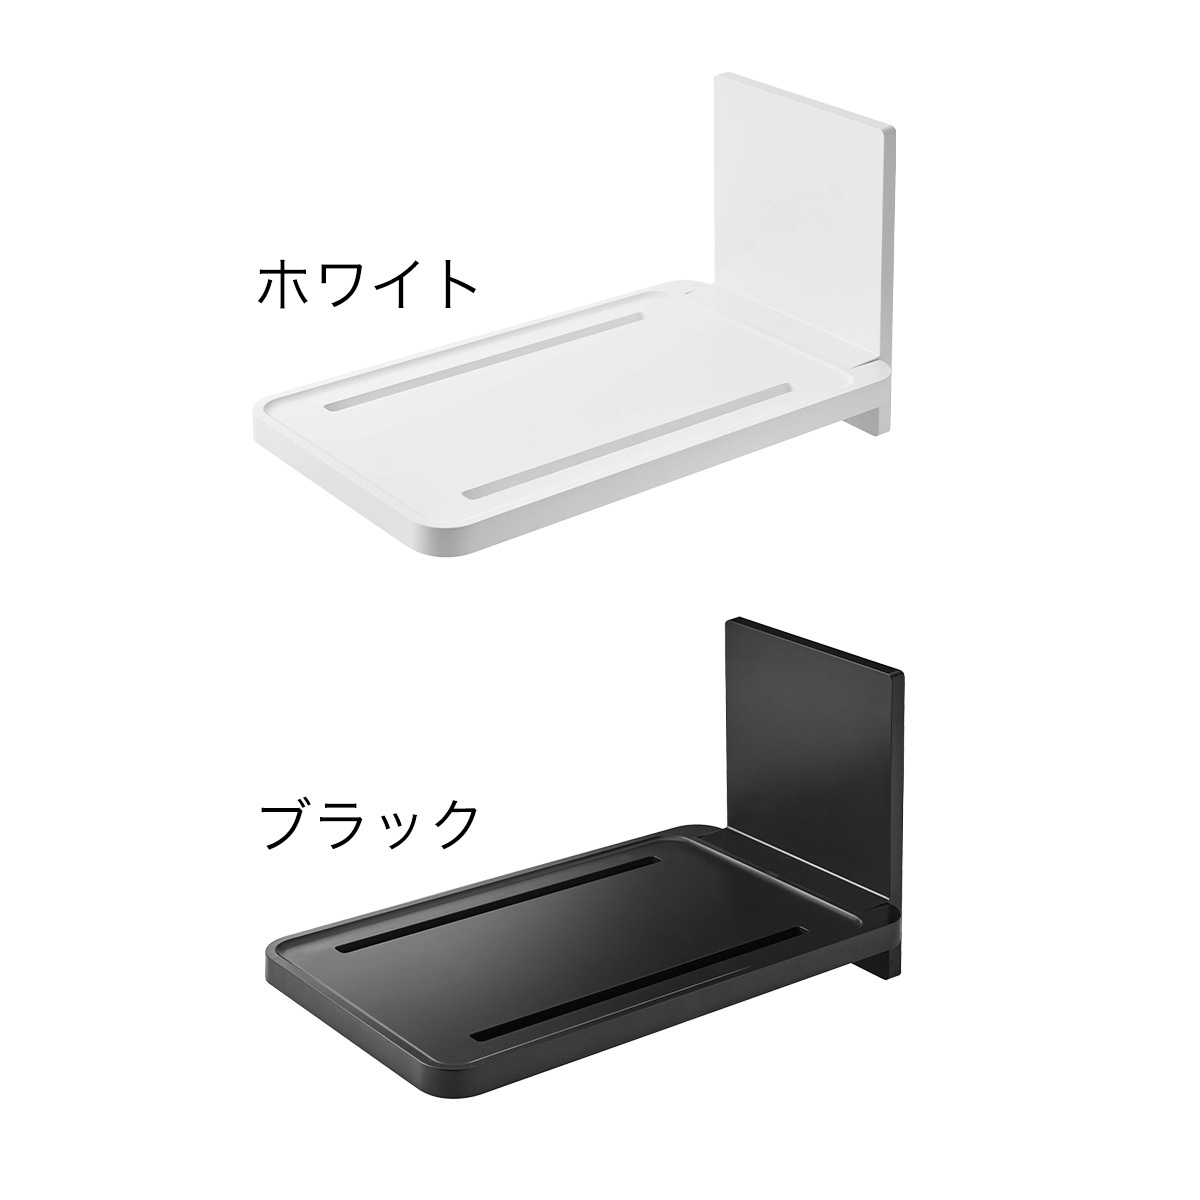 [ magnet bus room folding shelves tower ] Yamazaki real industry tower magnet smartphone stand bathroom storage tablet stand bus room shelves rack 5532 5533